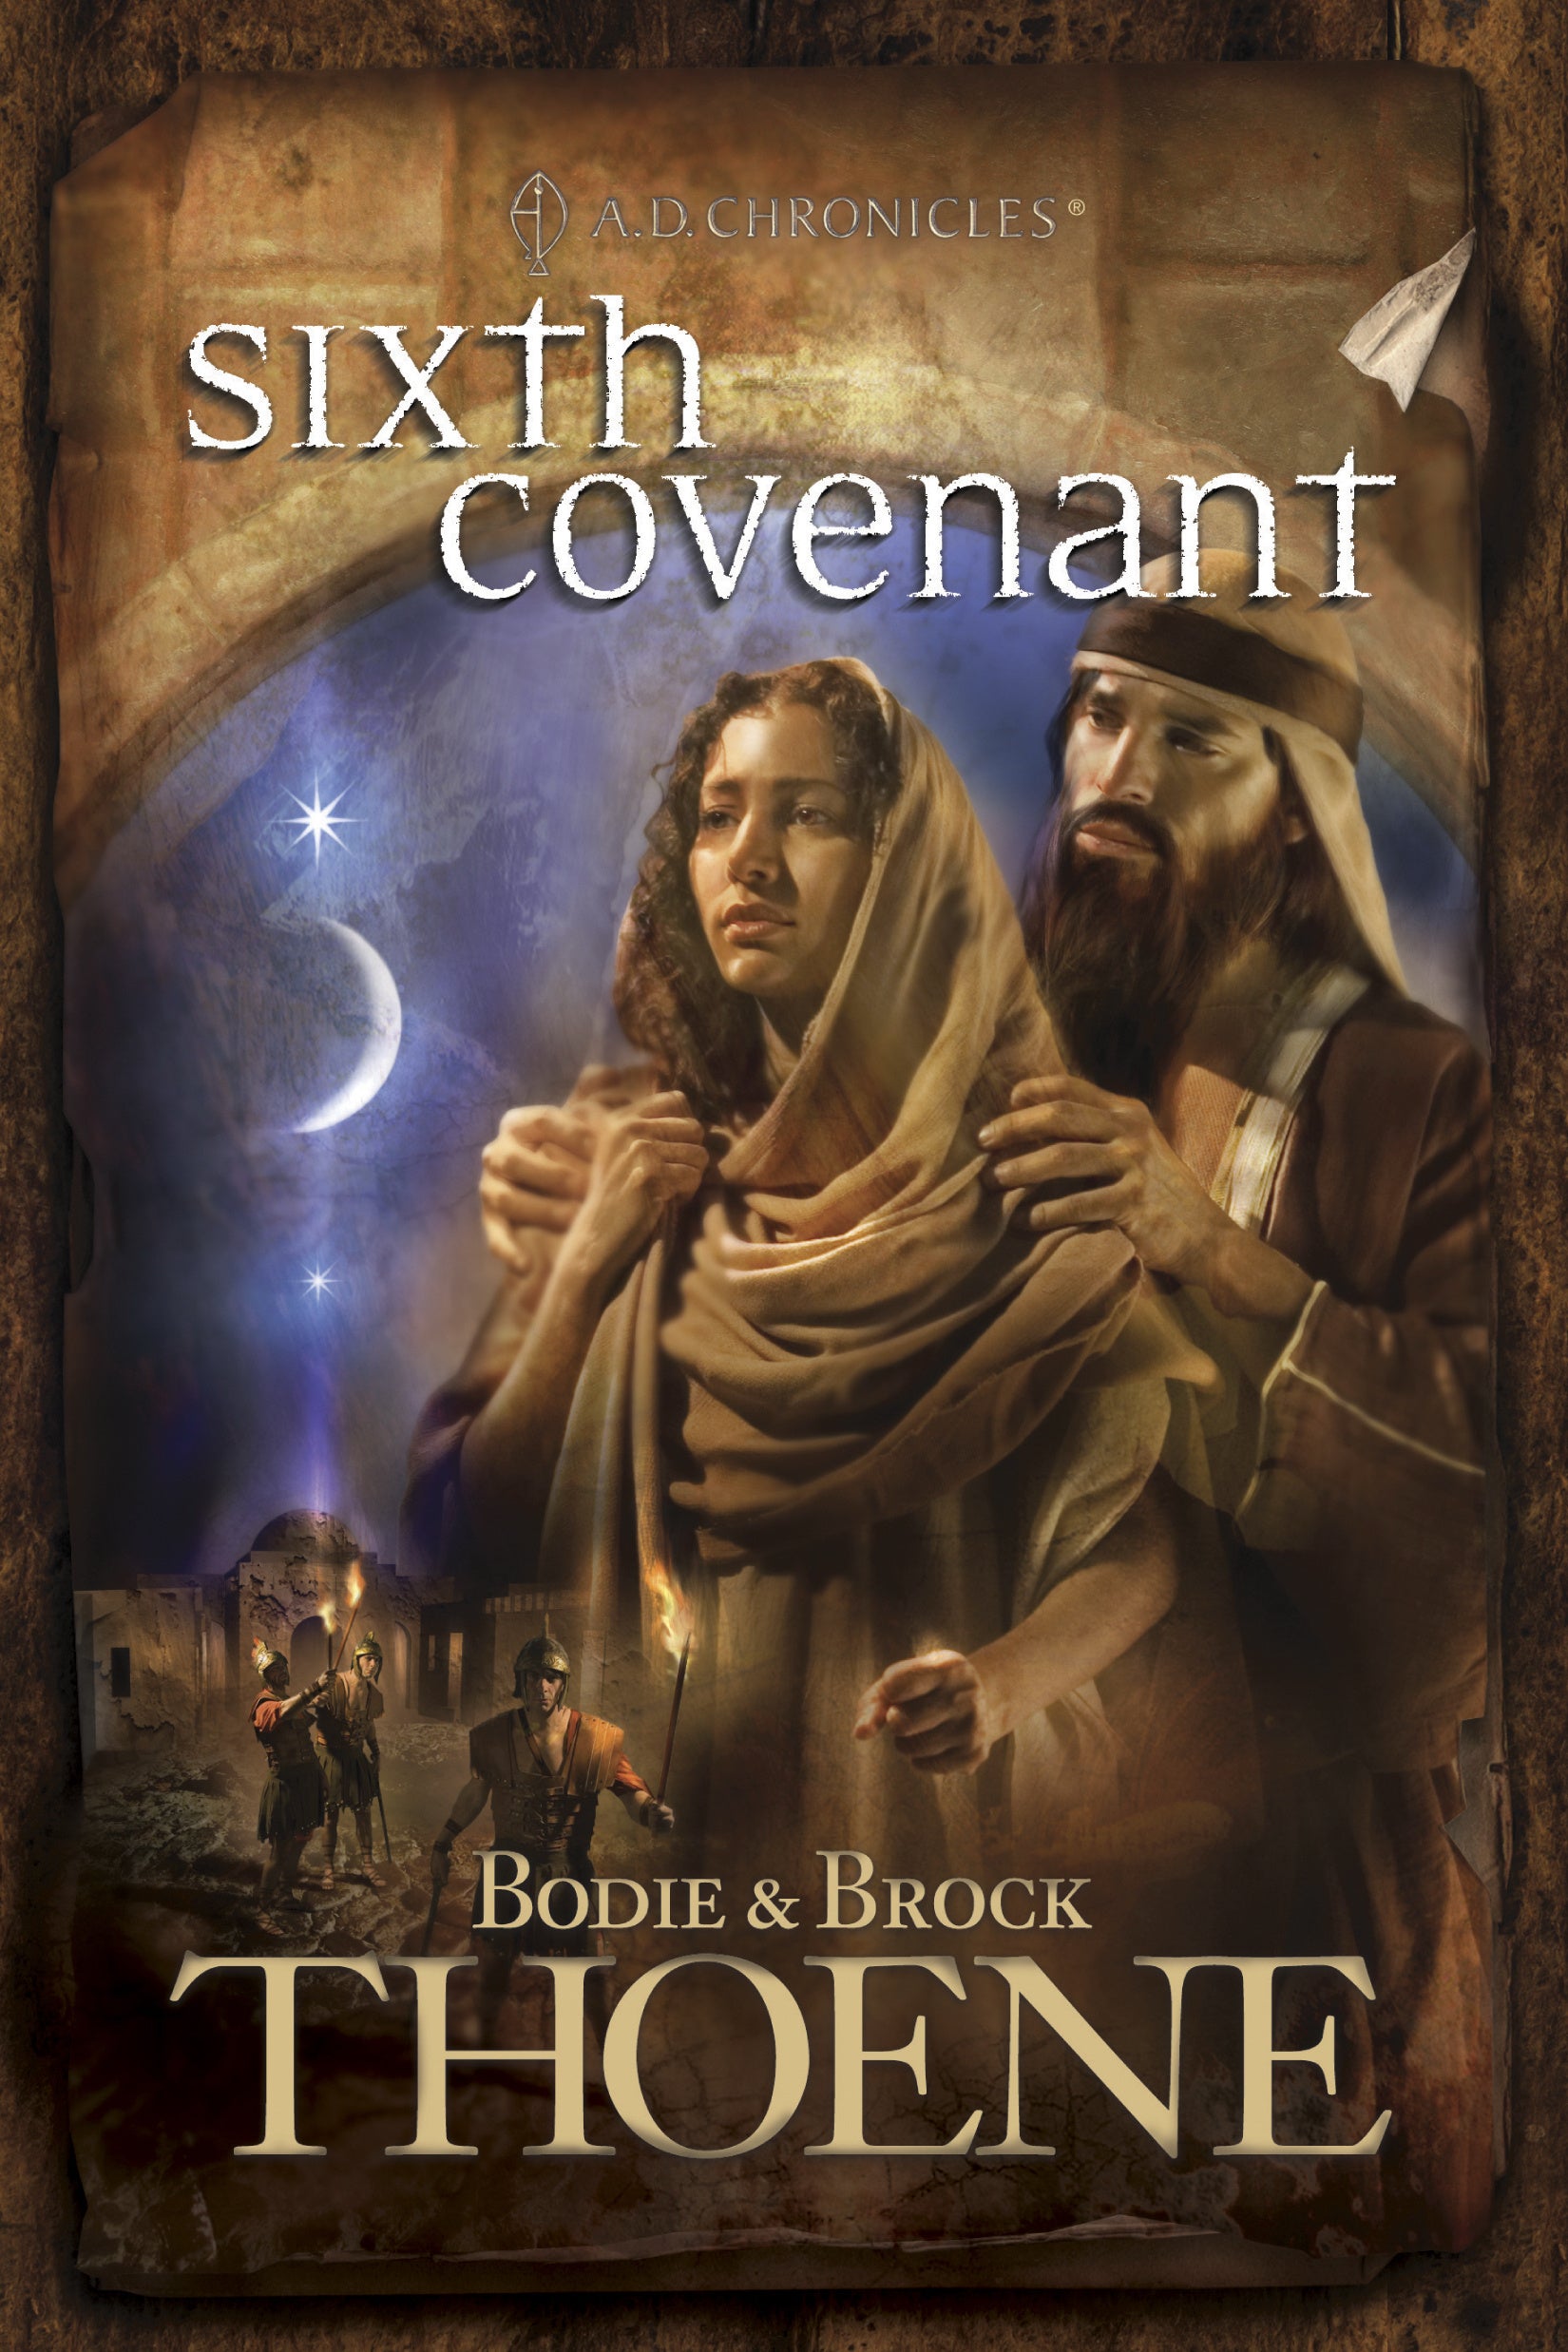 Image of Sixth Covenant other